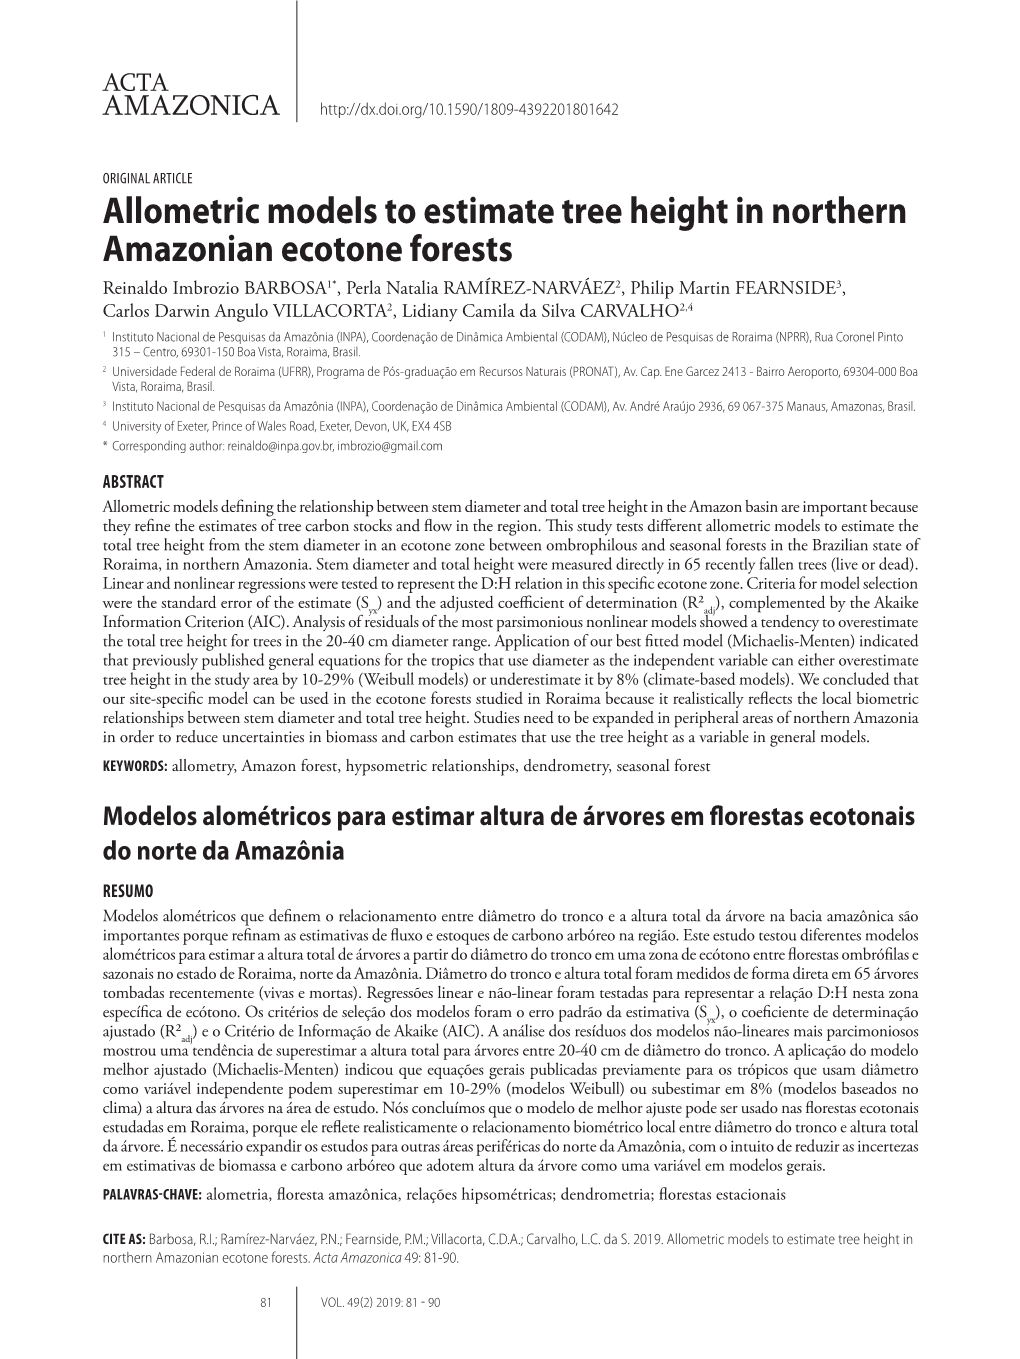 Allometric Models to Estimate Tree Height in Northern Amazonian Ecotone Forests